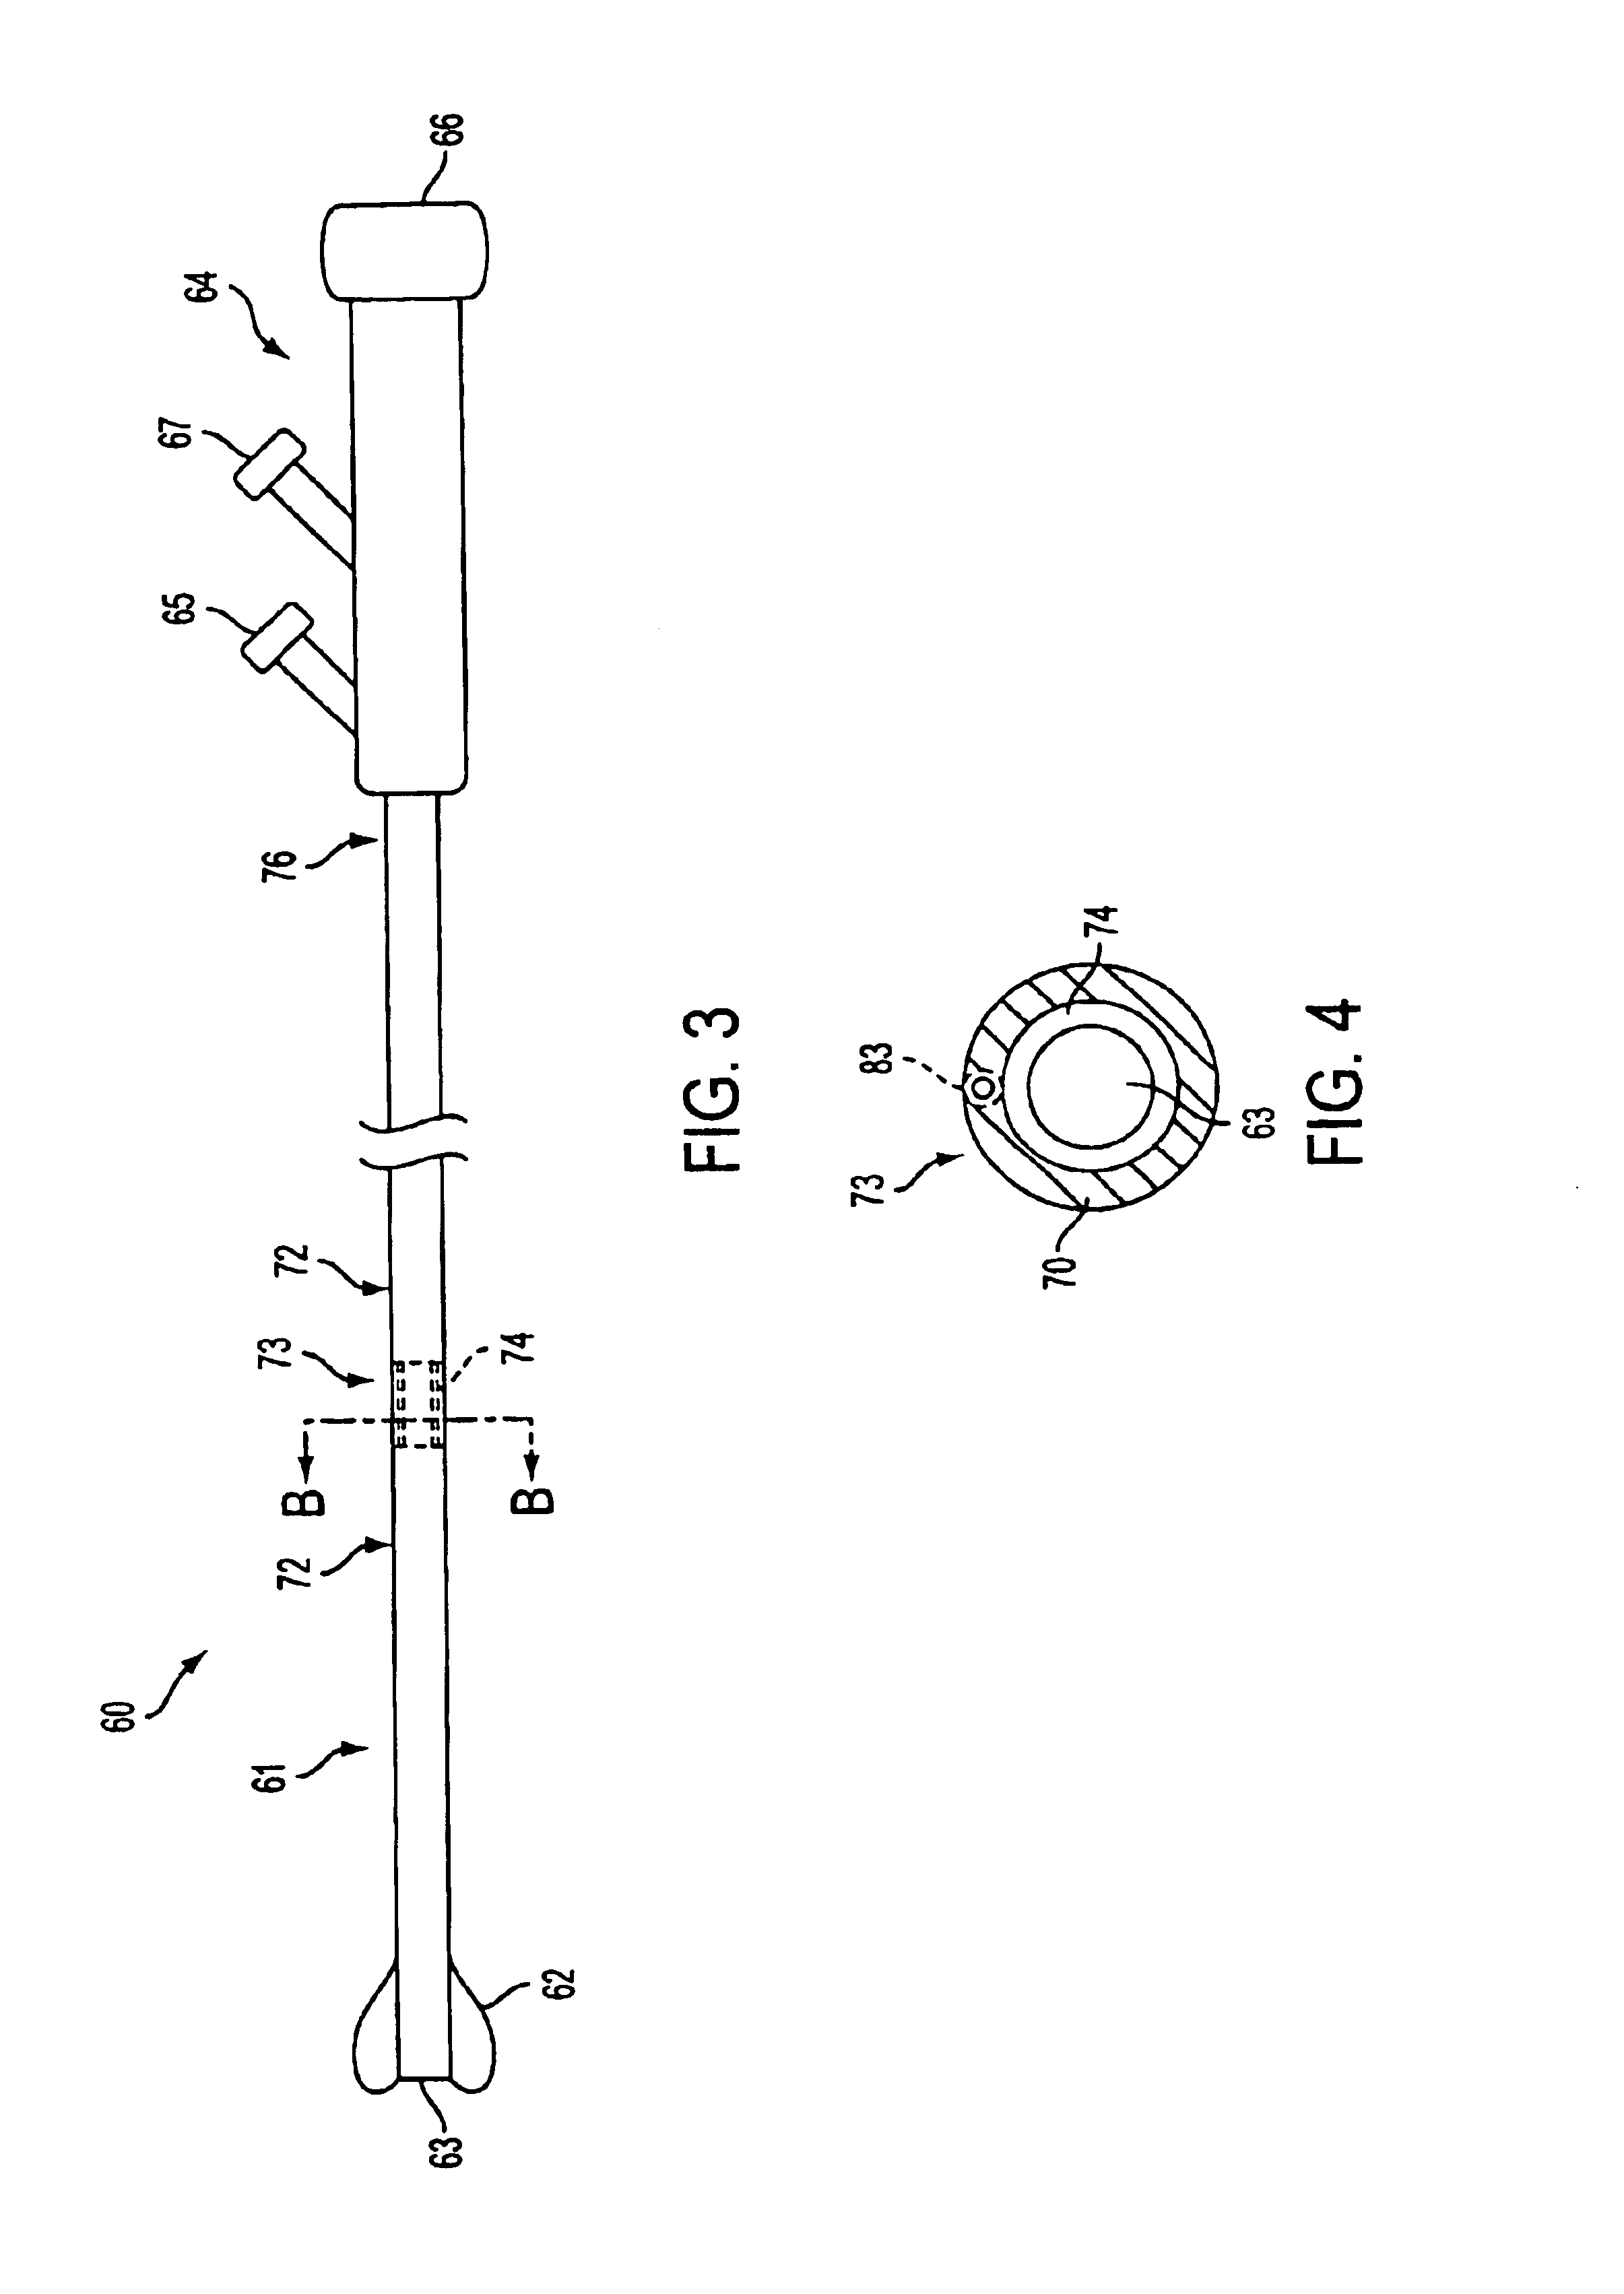 Catheter having a compliant member configured to regulate aspiration rates